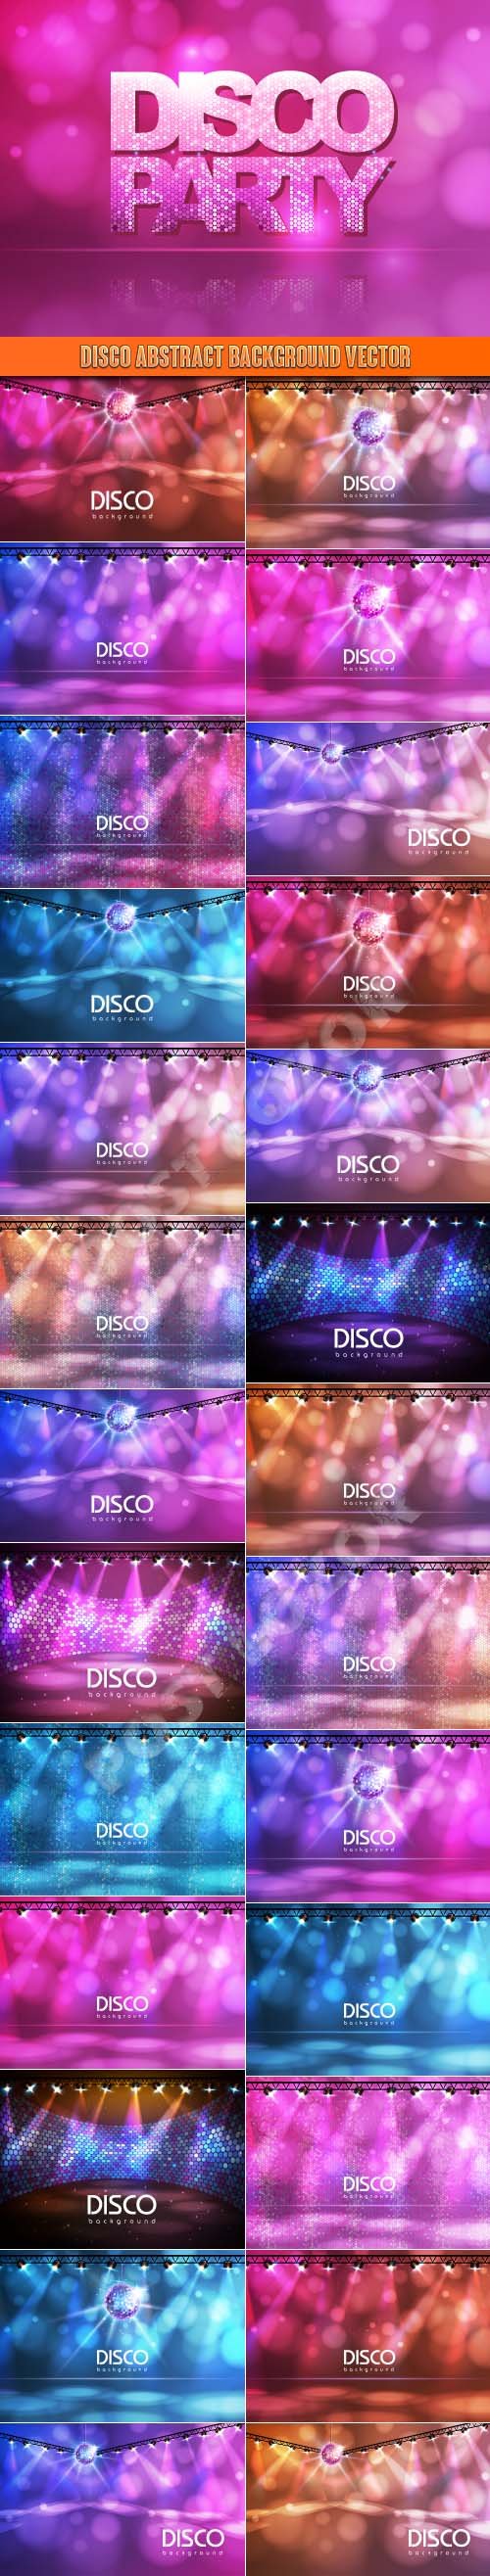 Disco Abstract Background Vector